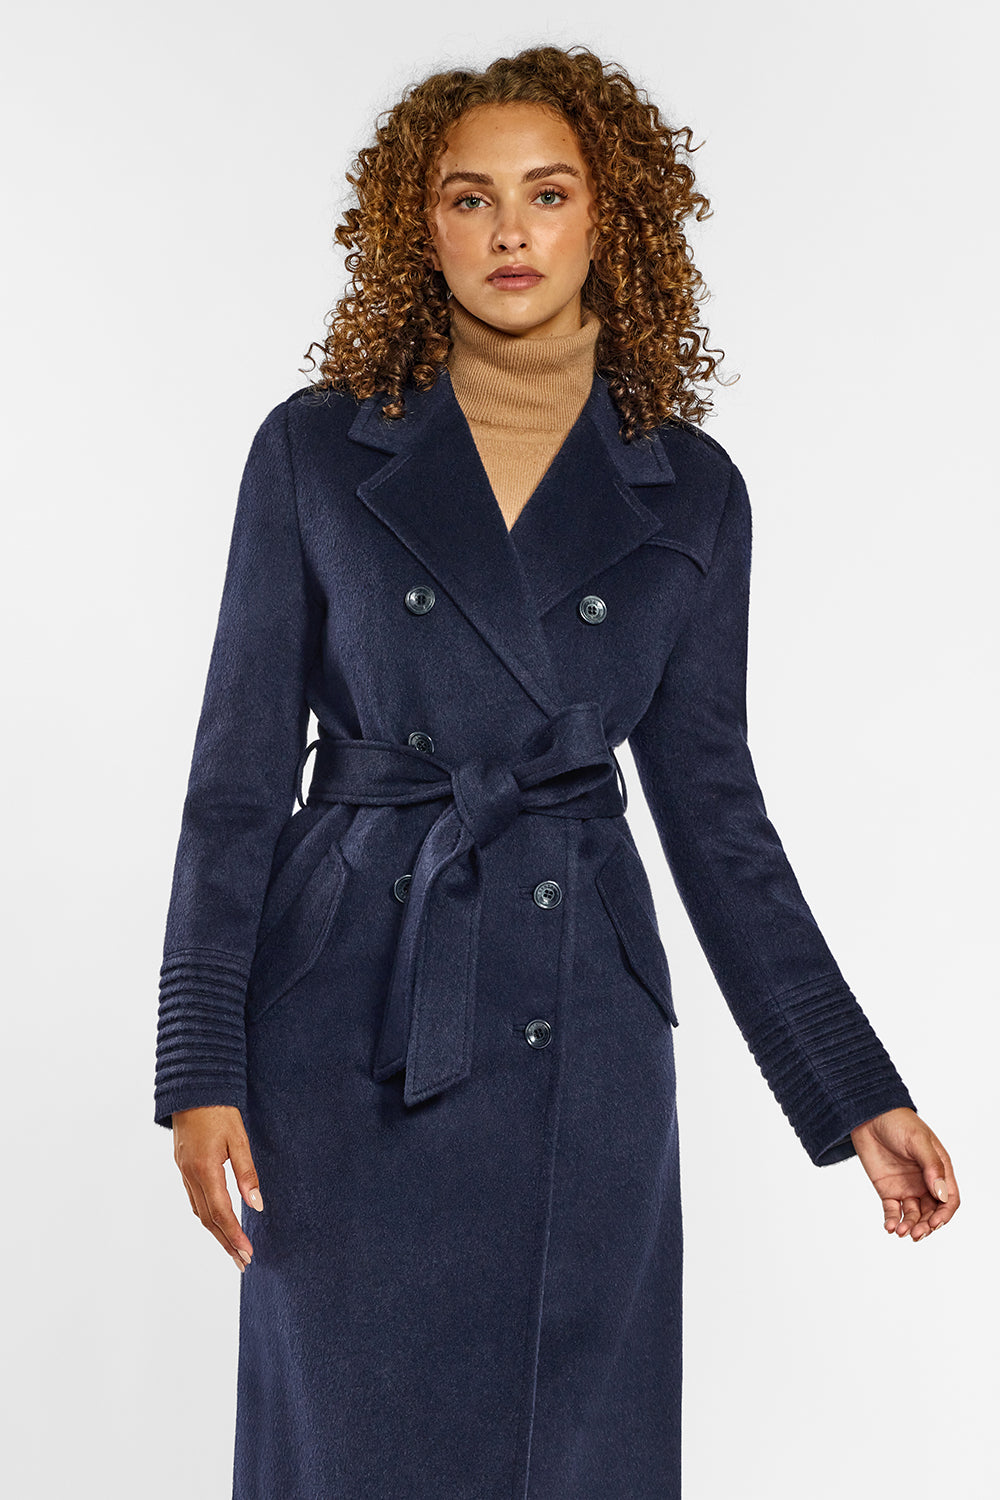 Autumn and Winter Double-Sided Wool Coat Women's Short Lapel Long